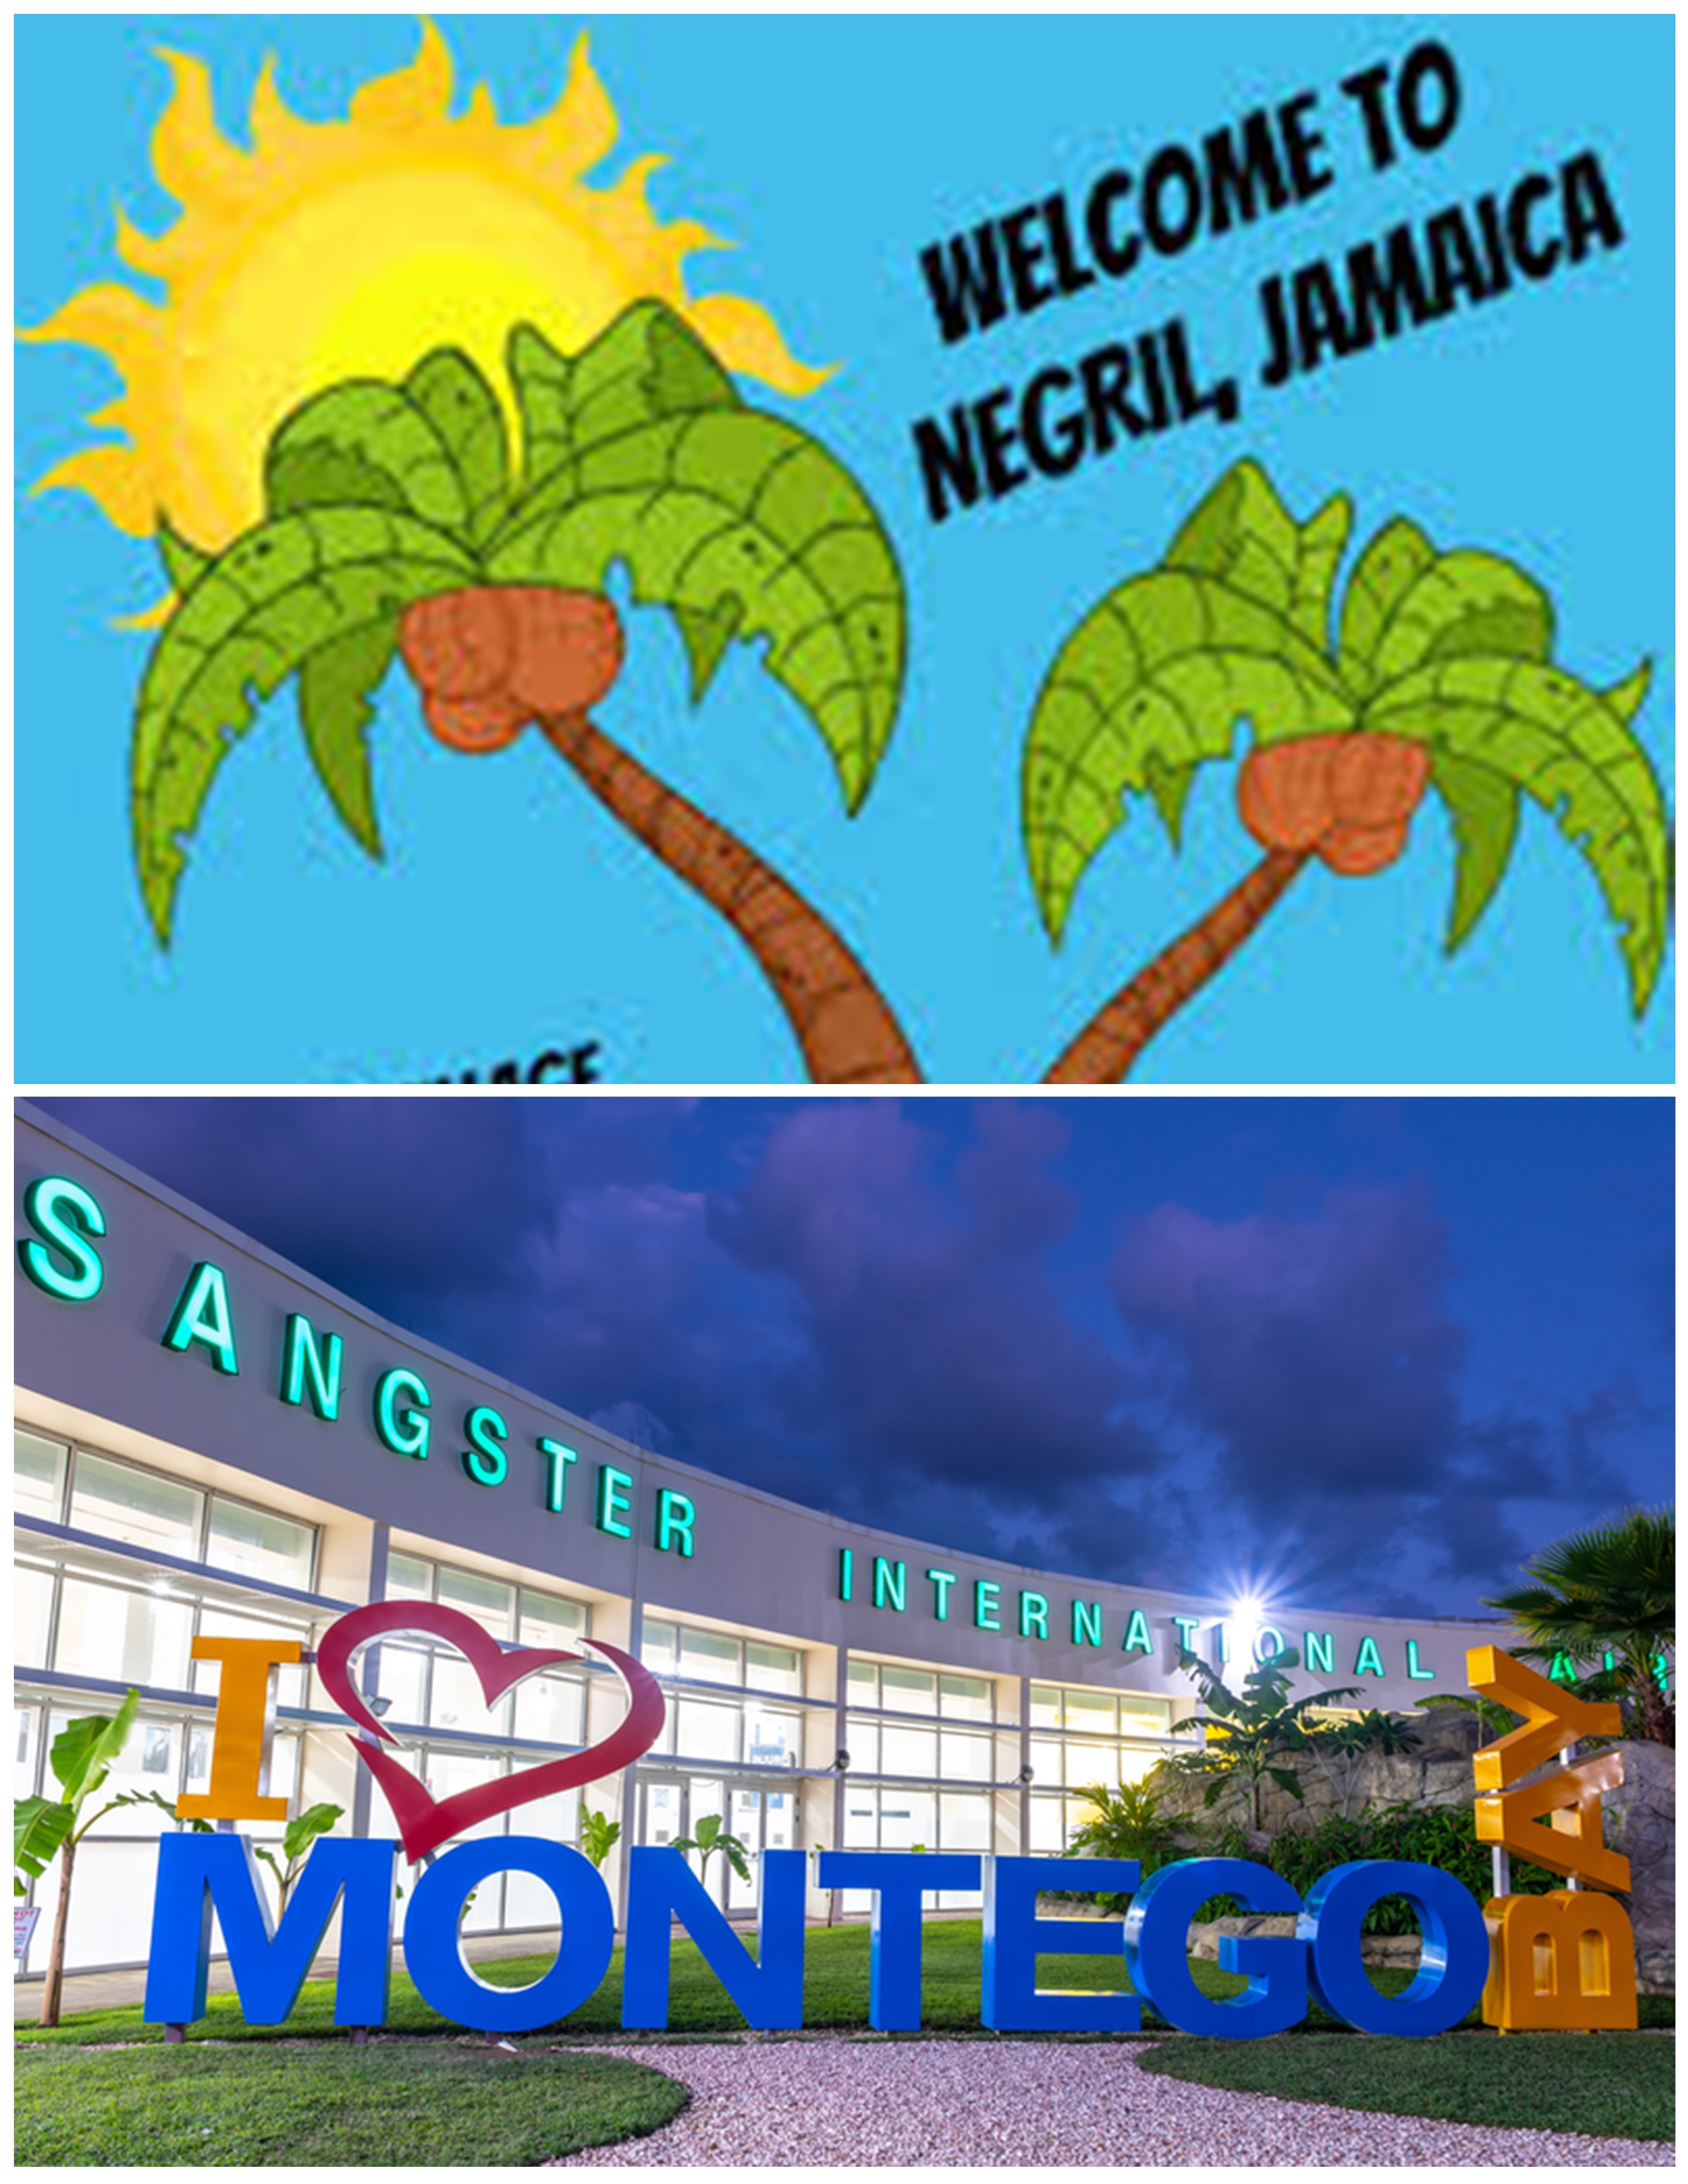 Negril Town - Donald Sangster's International ( Montego Bay)